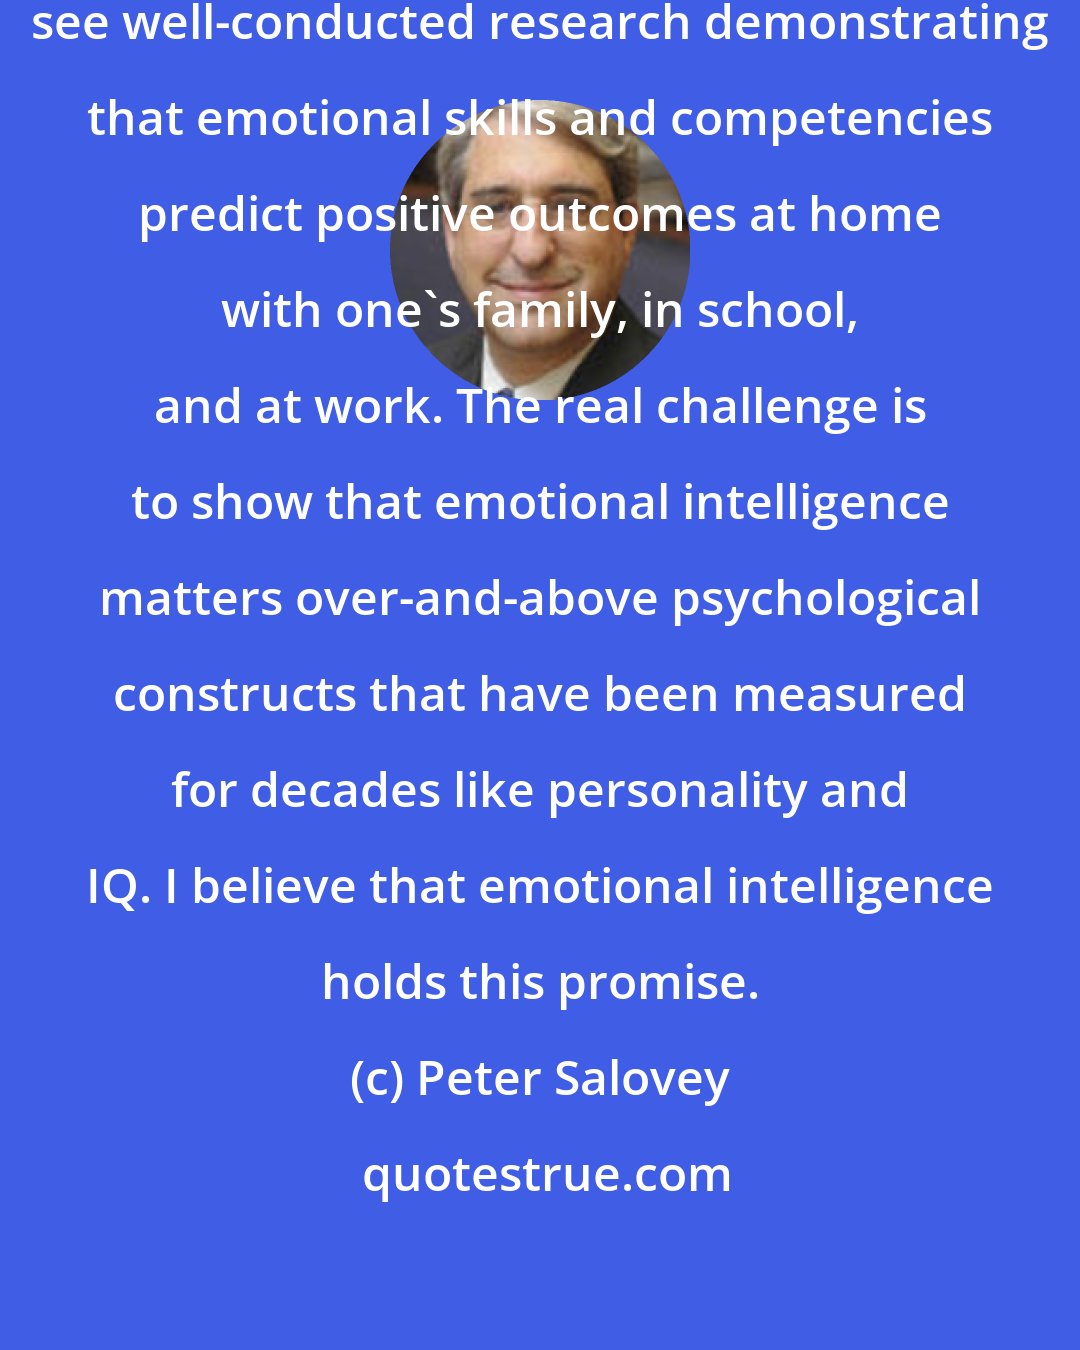 Peter Salovey: I think in the coming decade we will see well-conducted research demonstrating that emotional skills and competencies predict positive outcomes at home with one's family, in school, and at work. The real challenge is to show that emotional intelligence matters over-and-above psychological constructs that have been measured for decades like personality and IQ. I believe that emotional intelligence holds this promise.